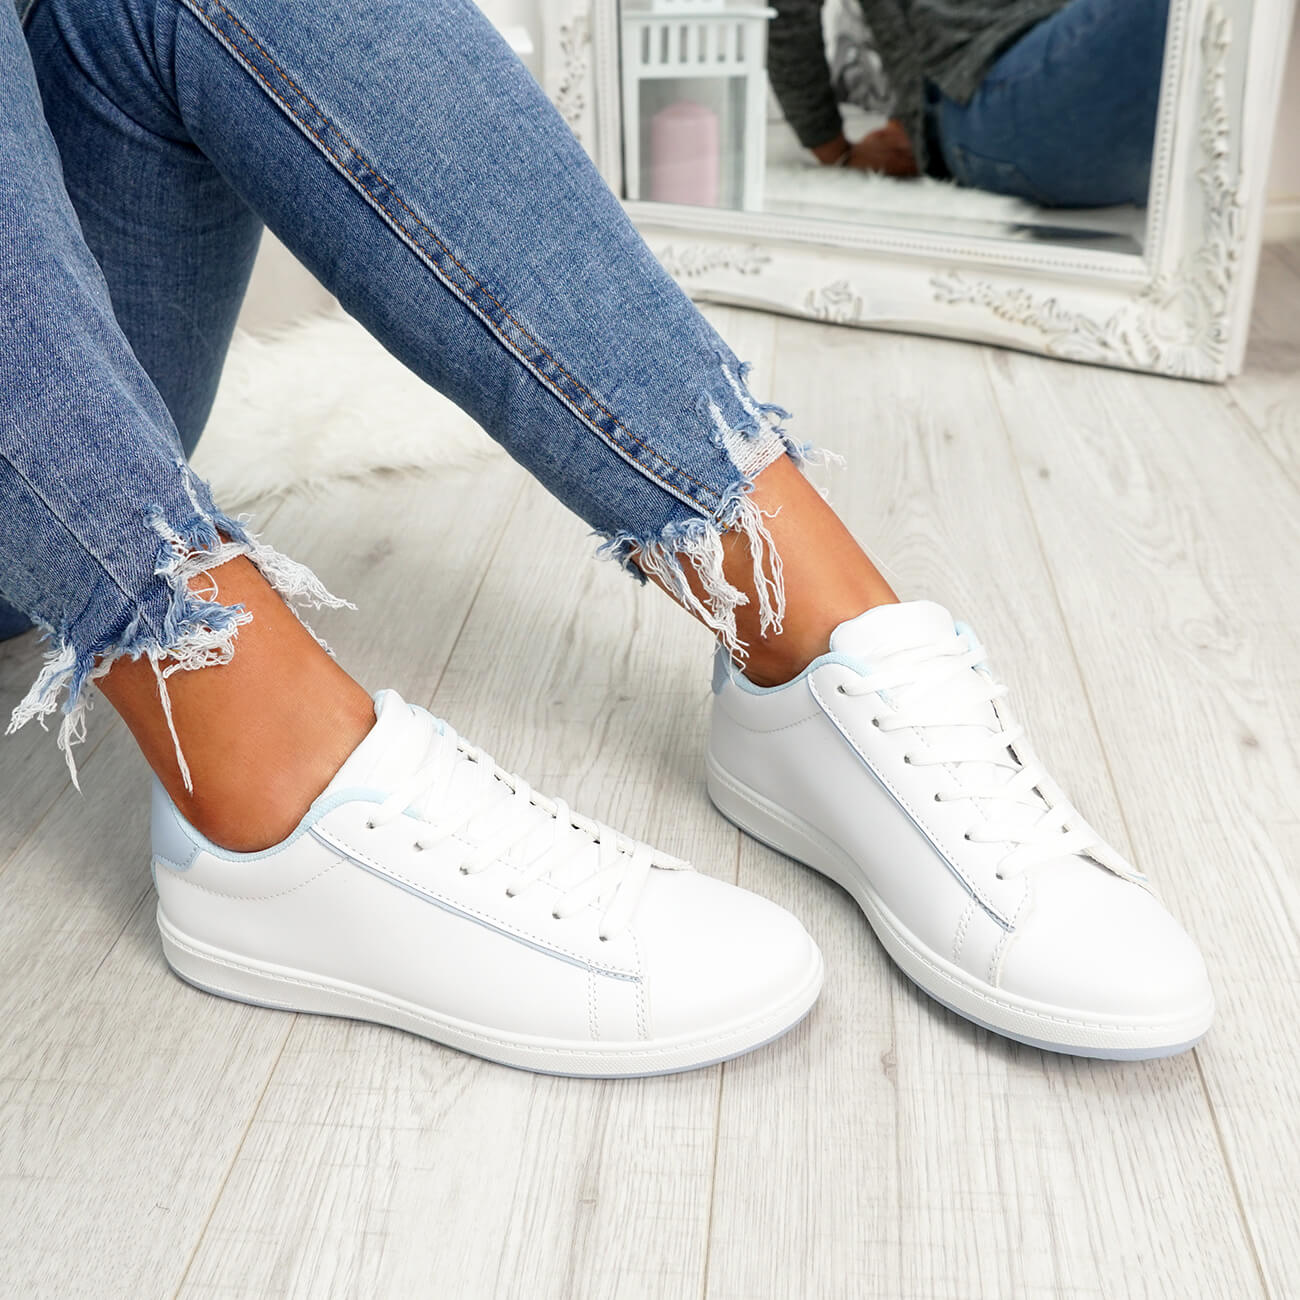 WOMENS LADIES LACE UP FLAT TRAINERS WOMEN PARTY COMFY SNEAKERS ...